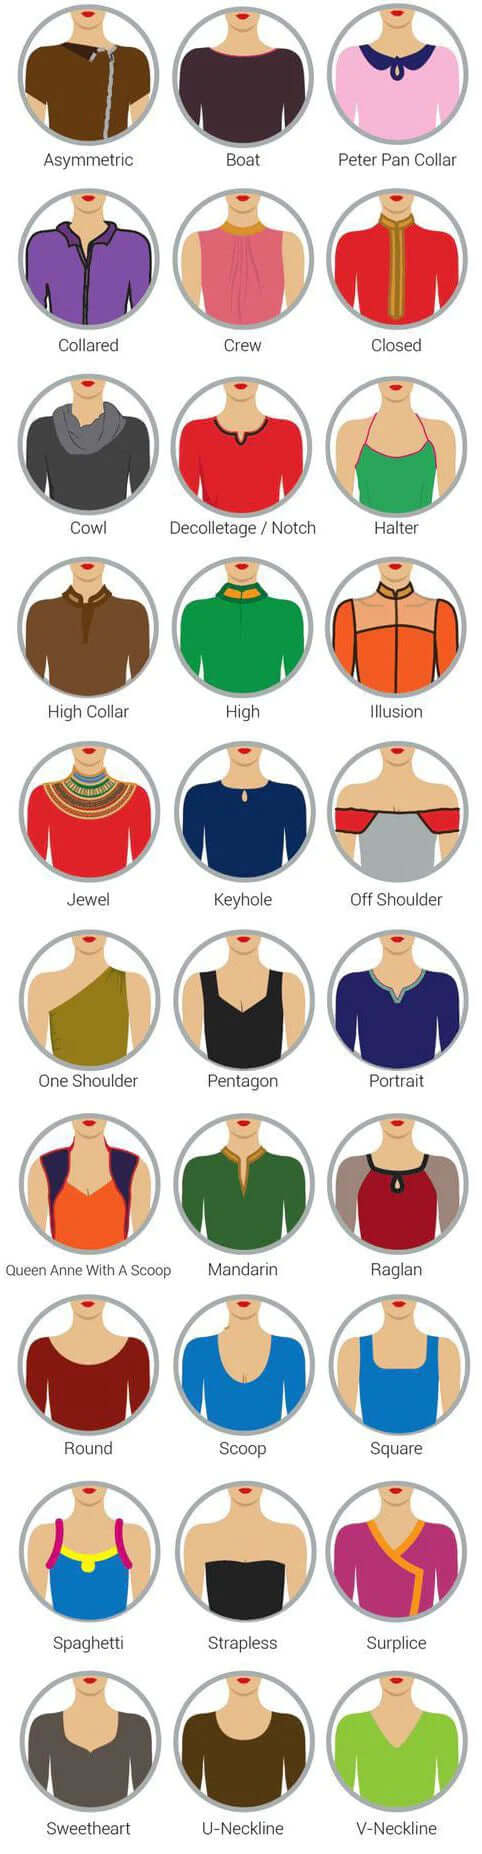 Necklines - the complete illustrated fashion guide to women's clothing necklines